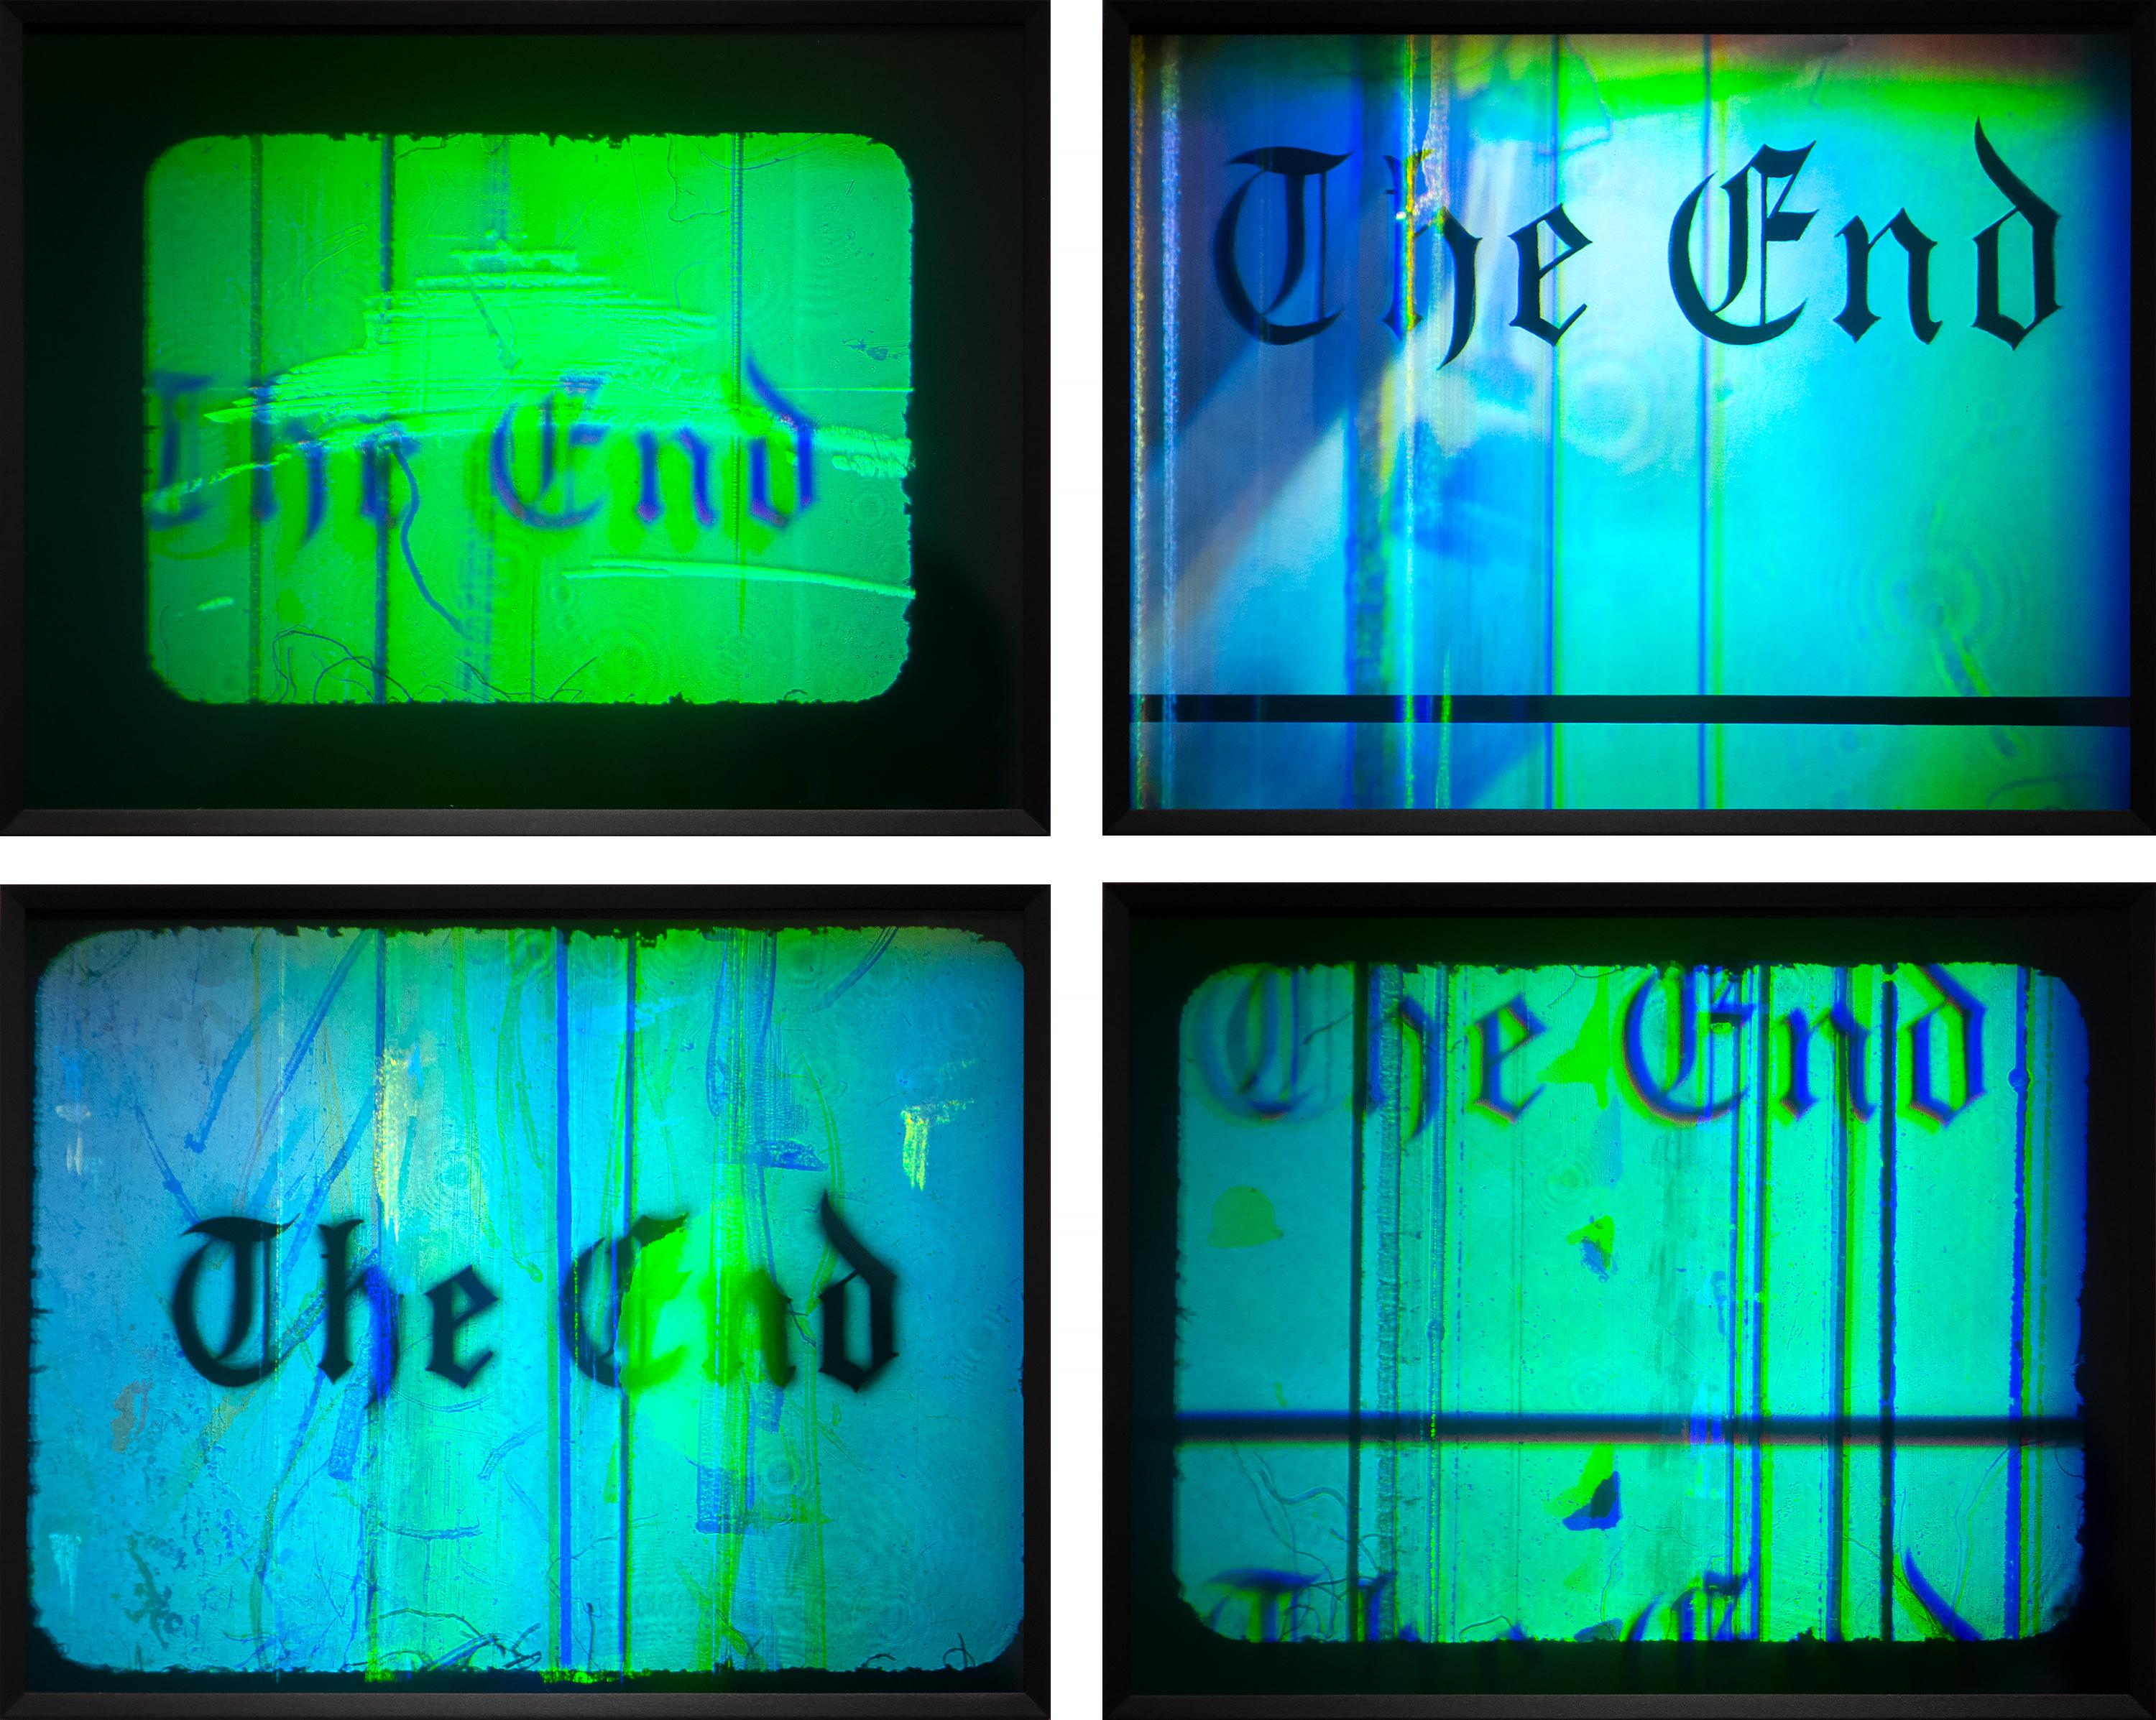 The End - Mixed Media Art by Ed Ruscha